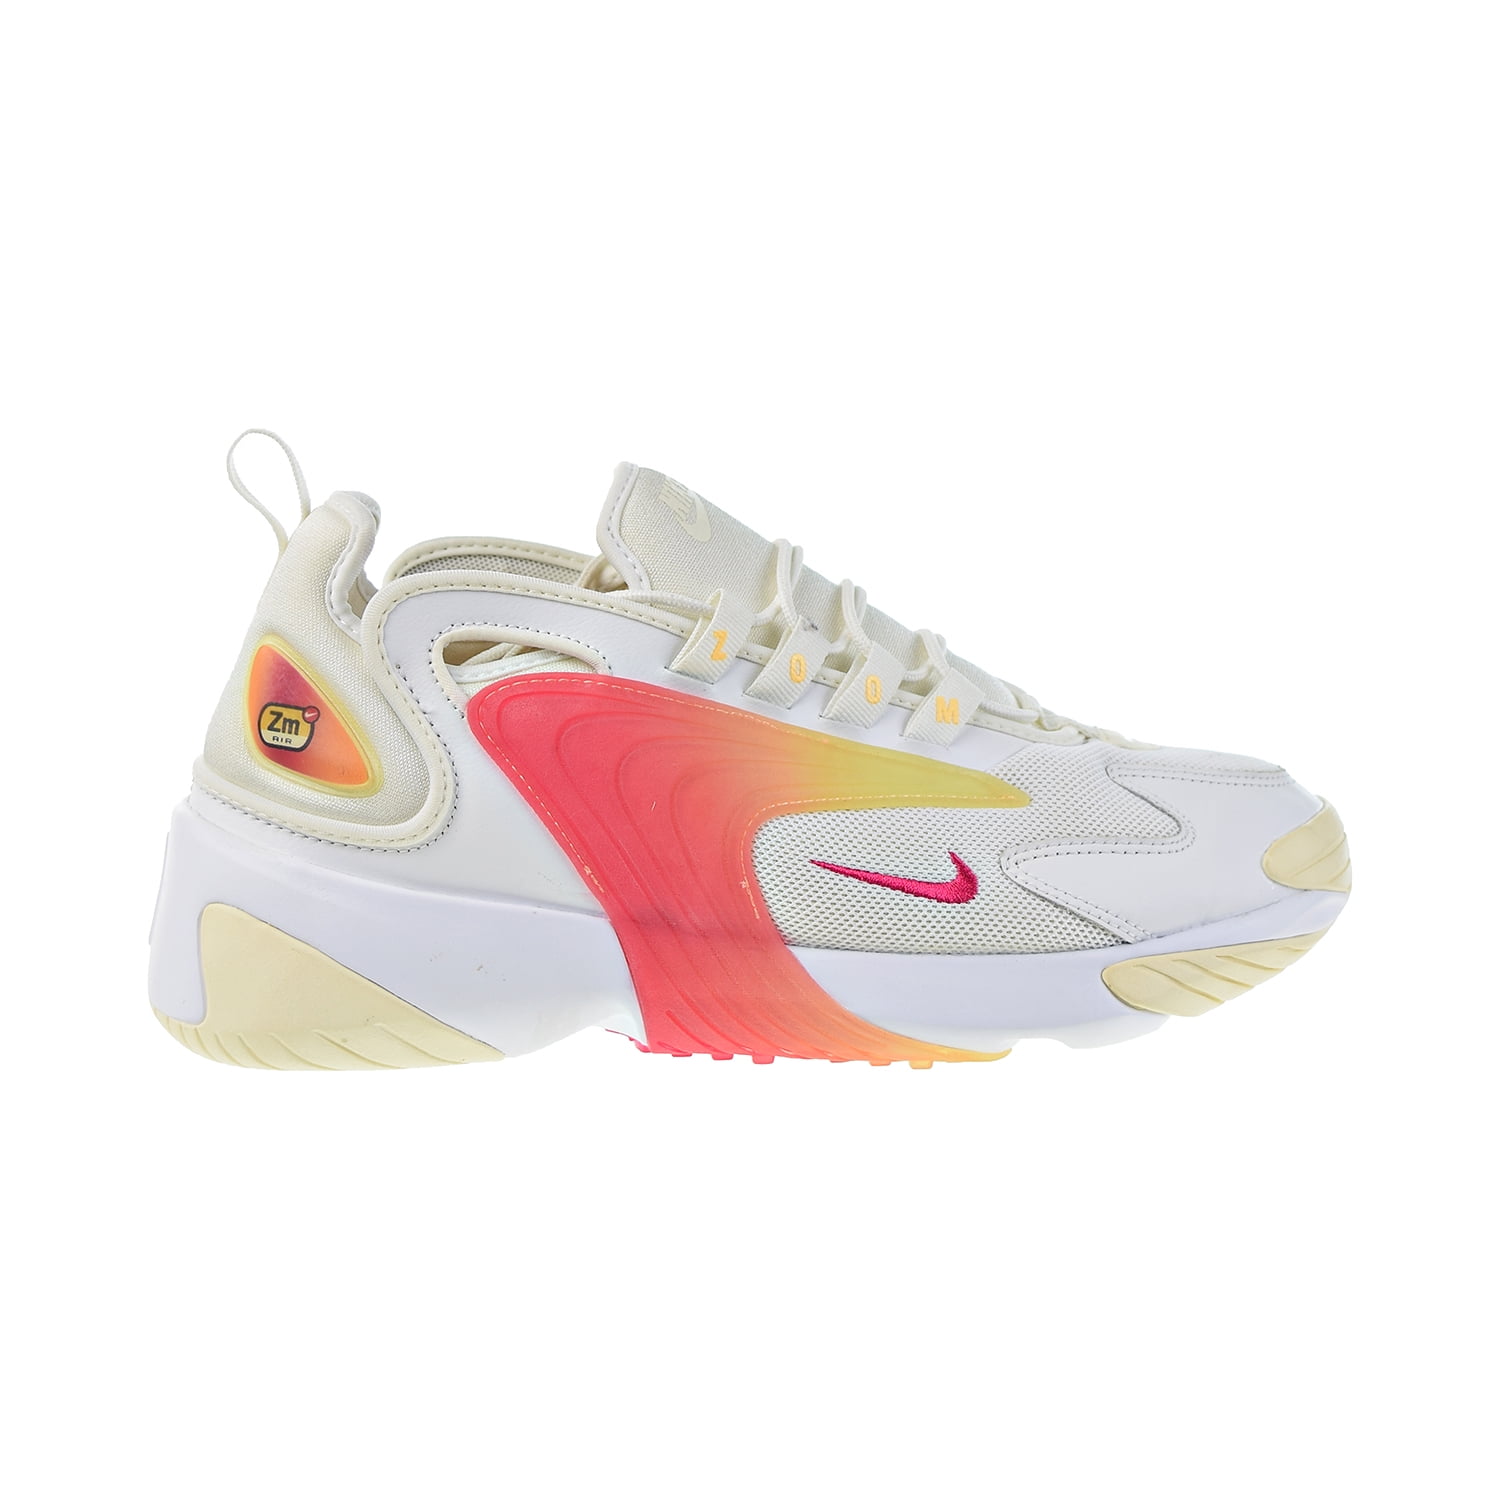 nike zoom 2k casual shoes